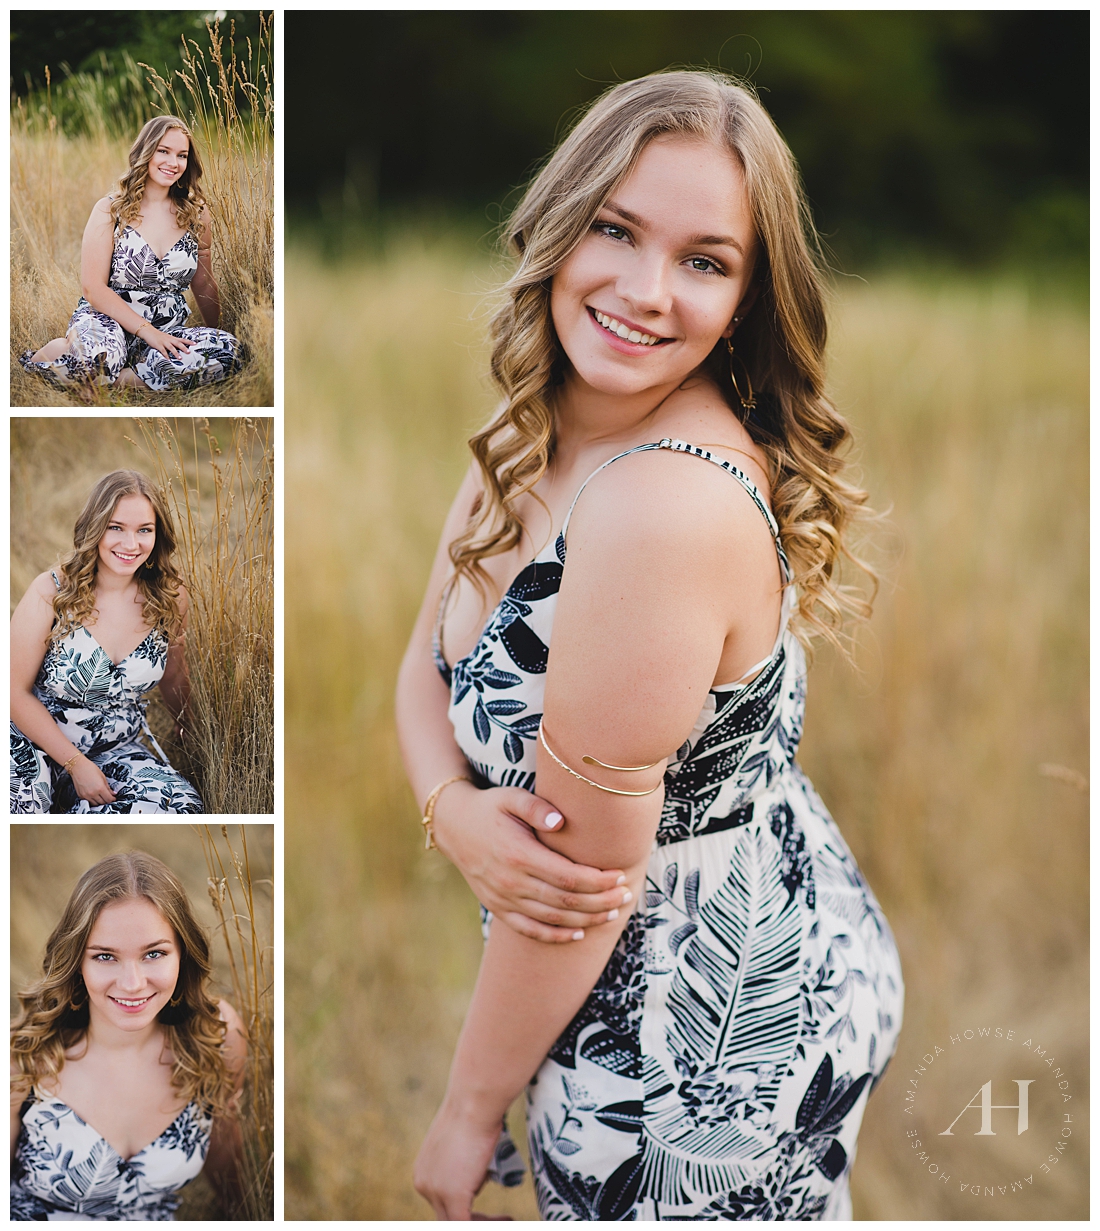 Rustic Senior Portraits with Casual Poses | Photographed by Tacoma Senior Photographer Amanda Howse